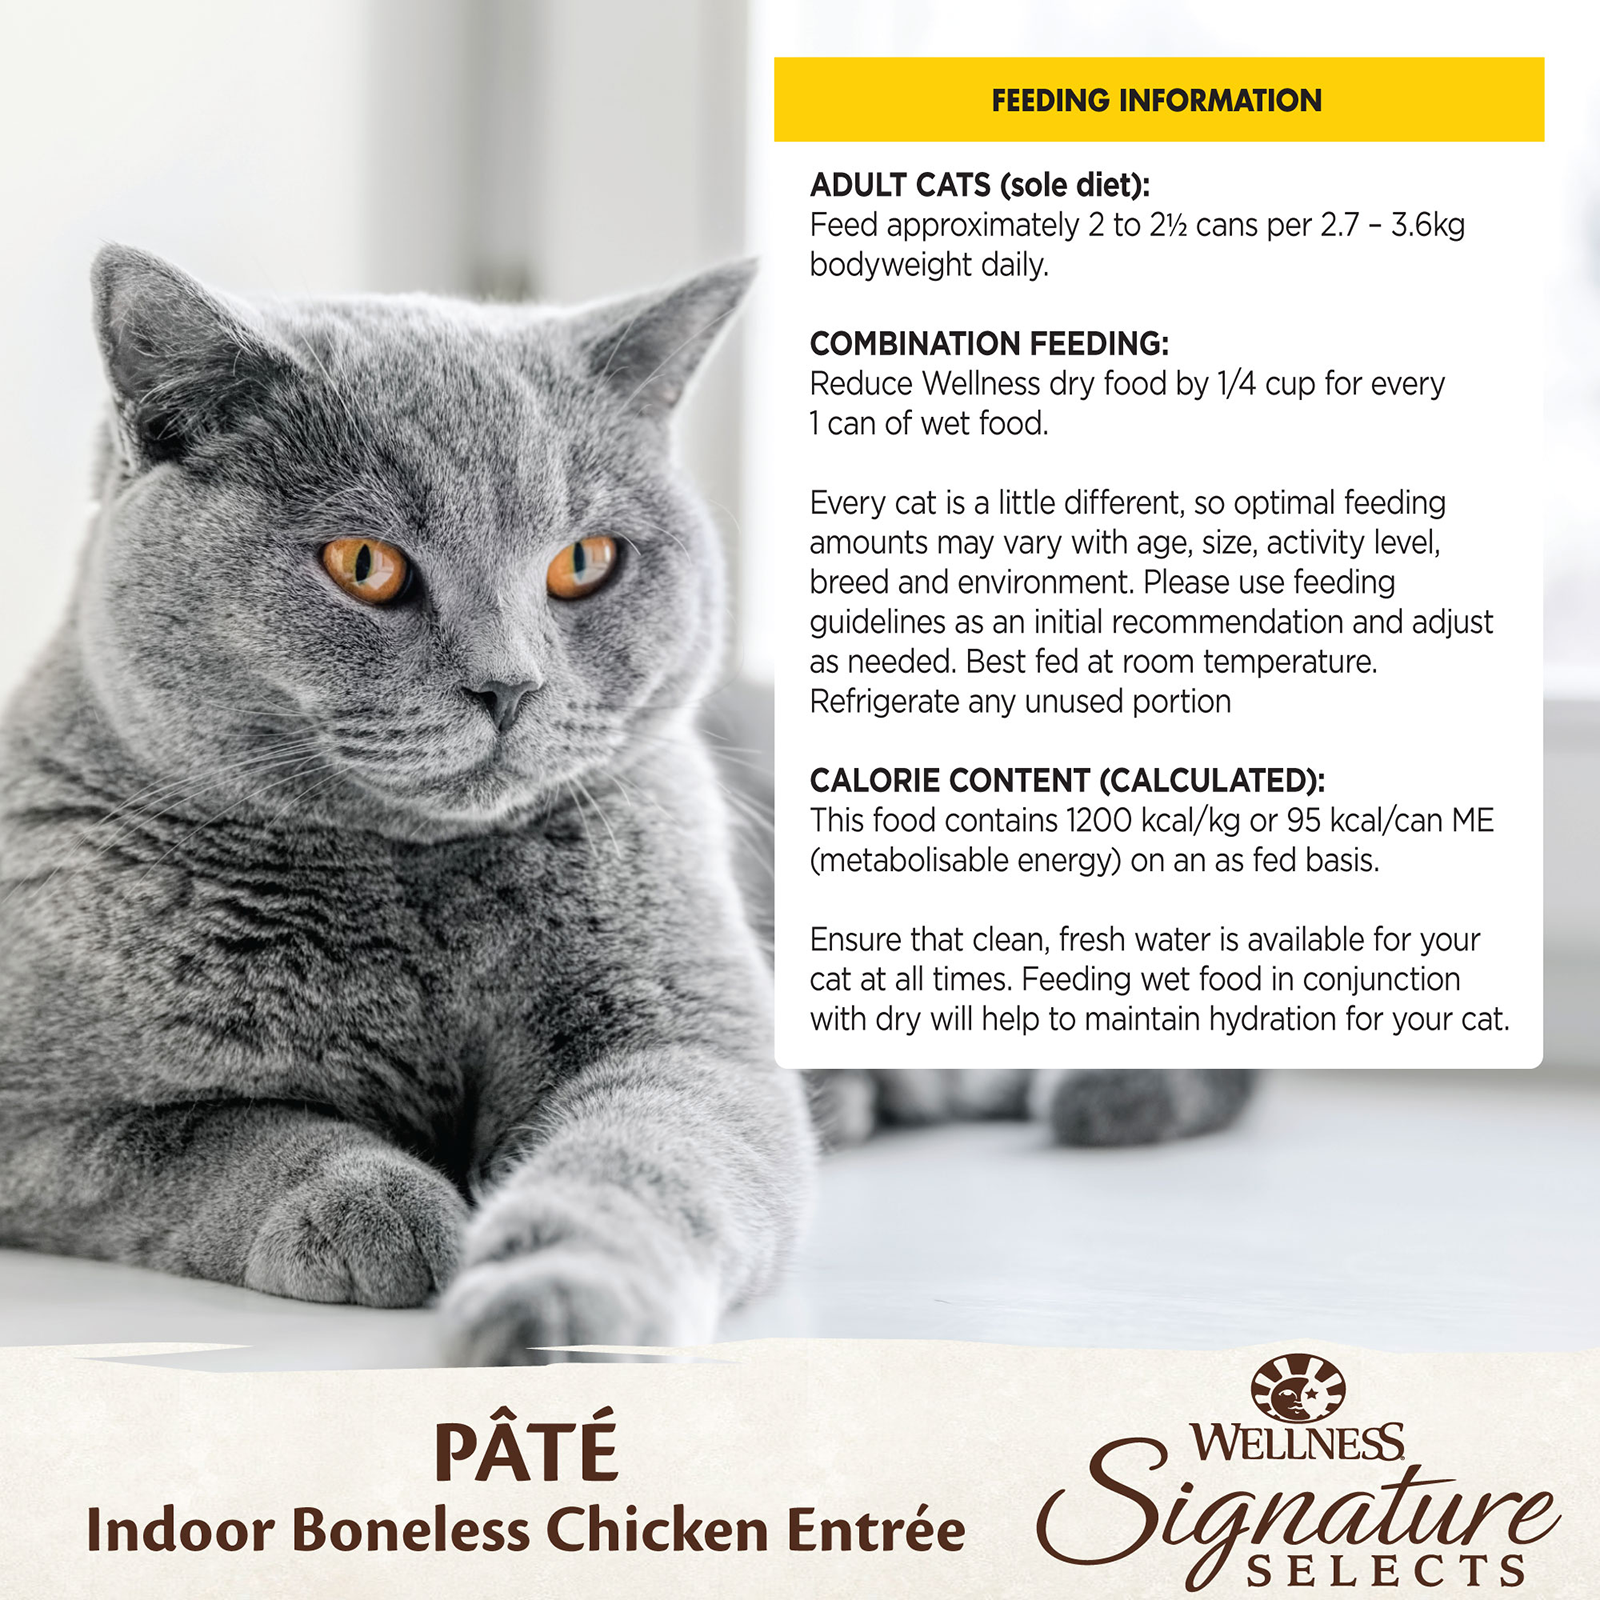 Wellness CORE Signature Selects Cat Food Can Adult Indoor Boneless Chicken Entreé